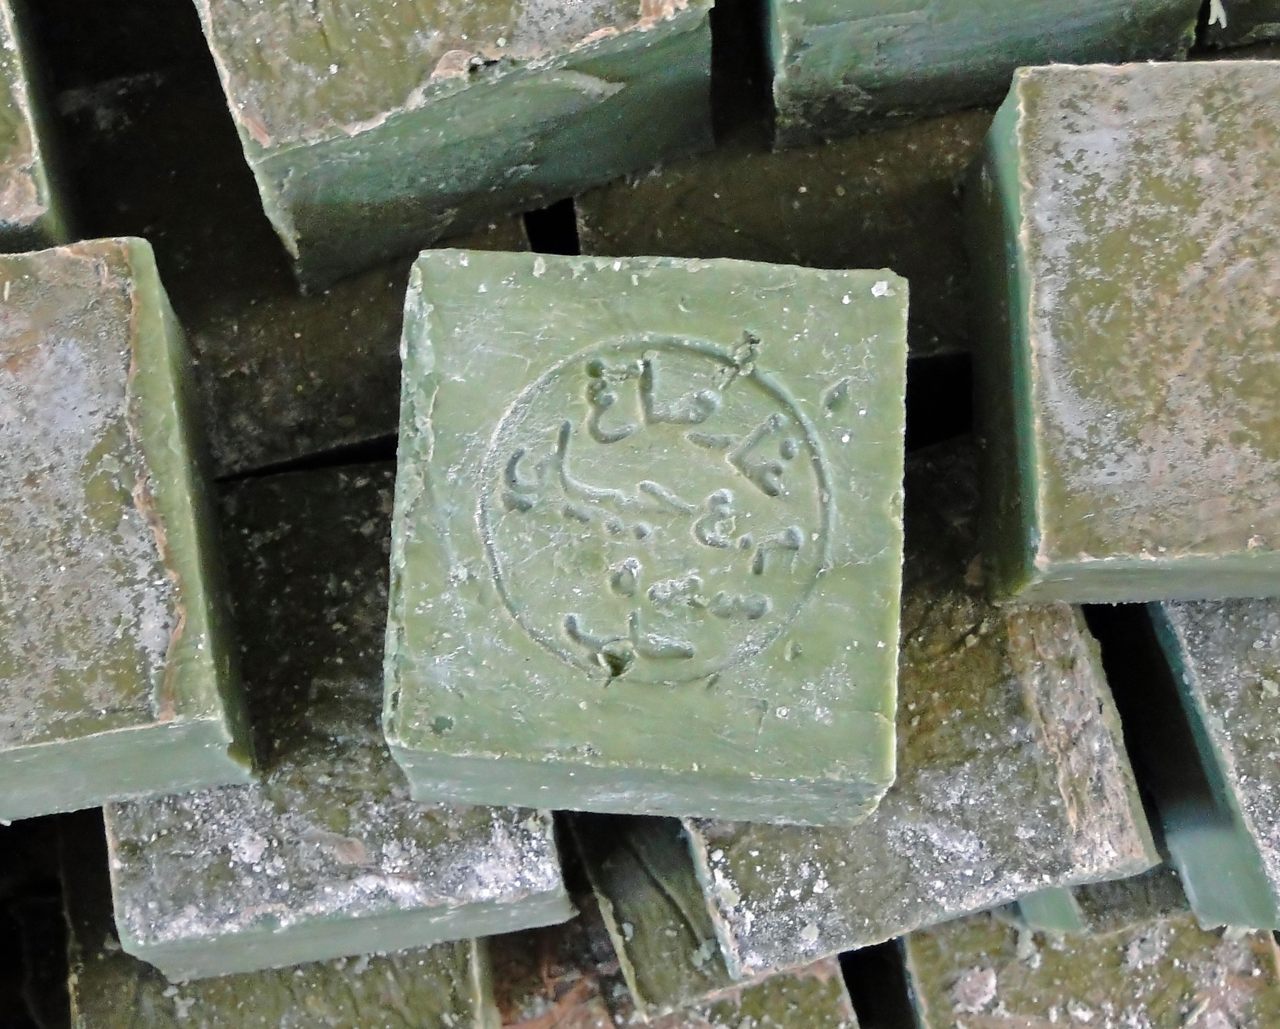 Accept no substitutes: Authentic Aleppo soap bears its maker's mark, and the Arabic name for the city of its origin.